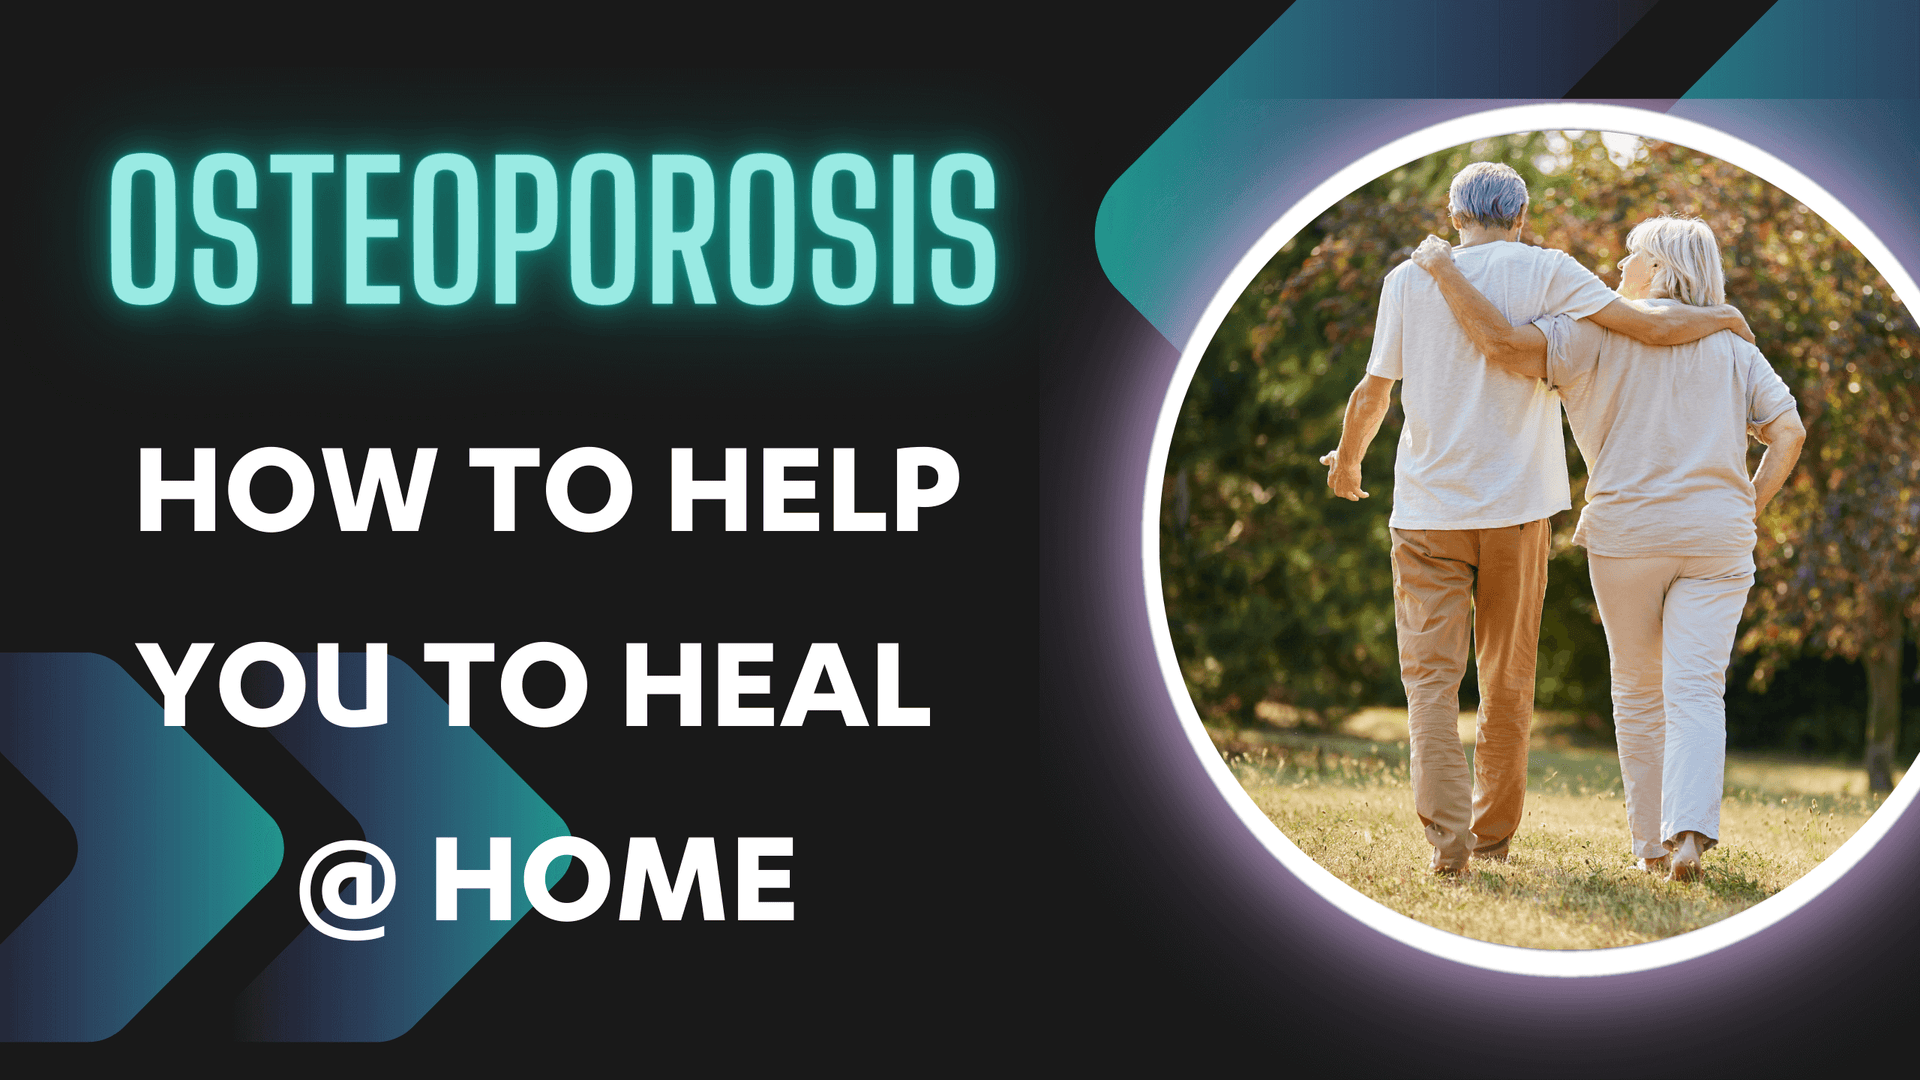 Dr Kez ChiroLab Osteoporosis Osteopenia Heal at home